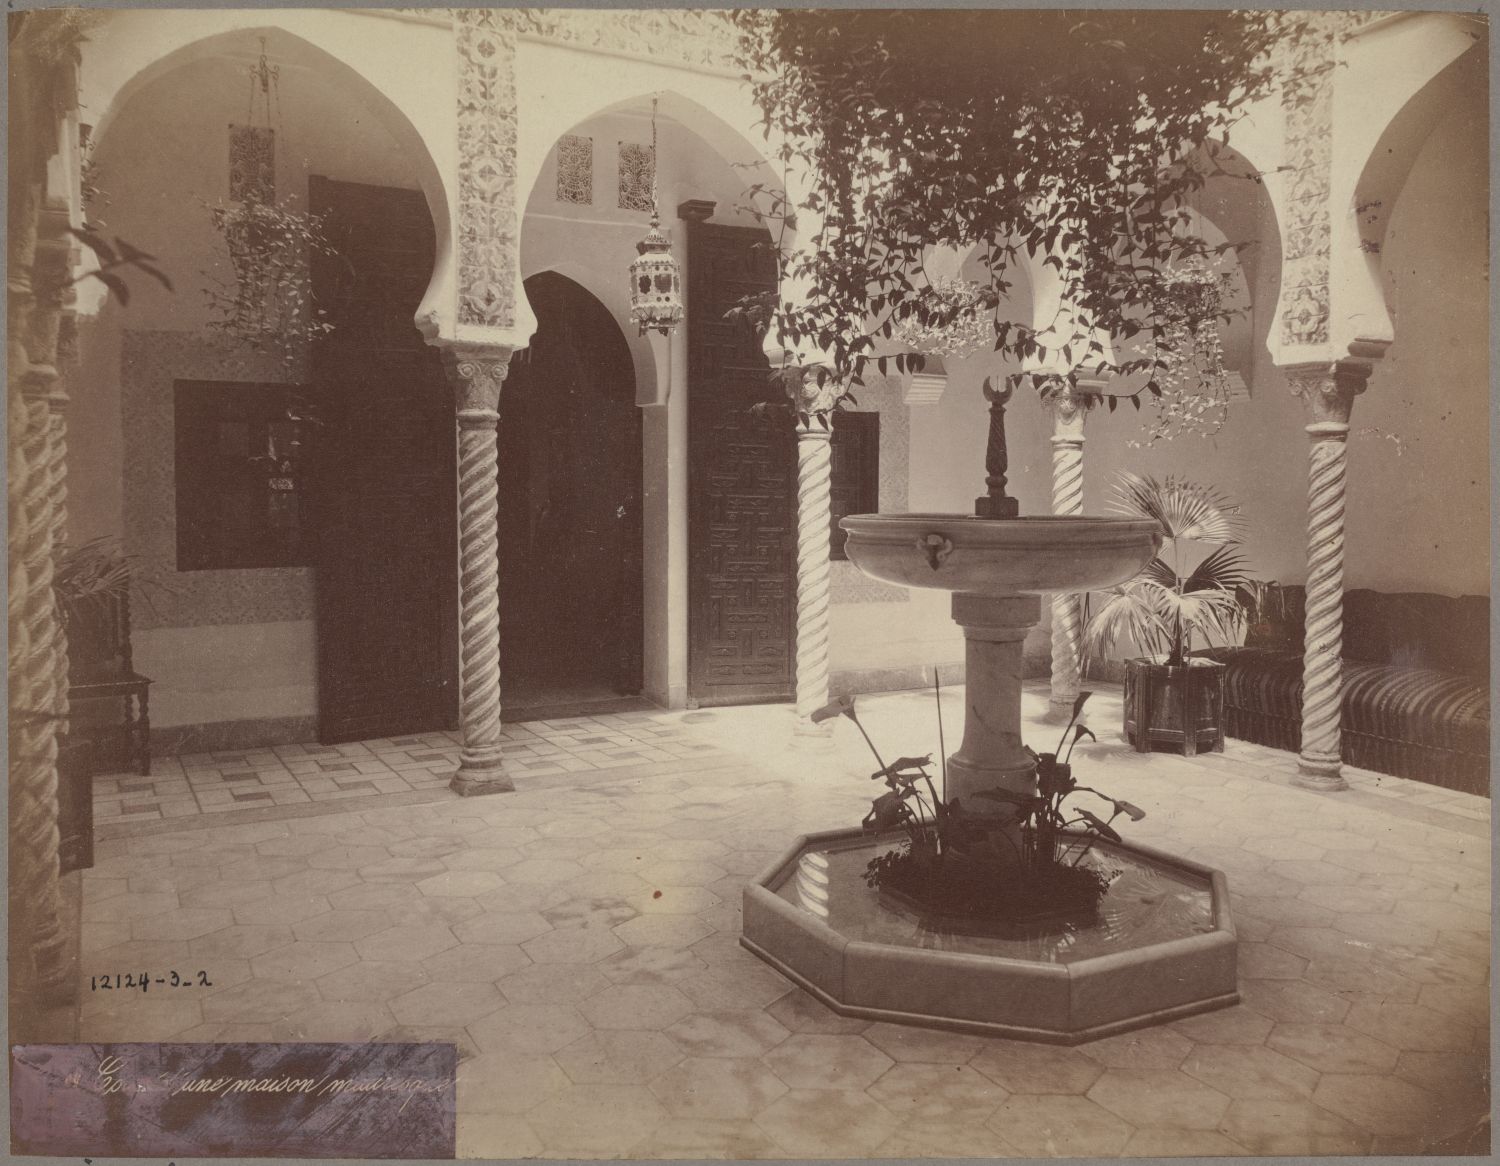 View of the courtyard and fountain